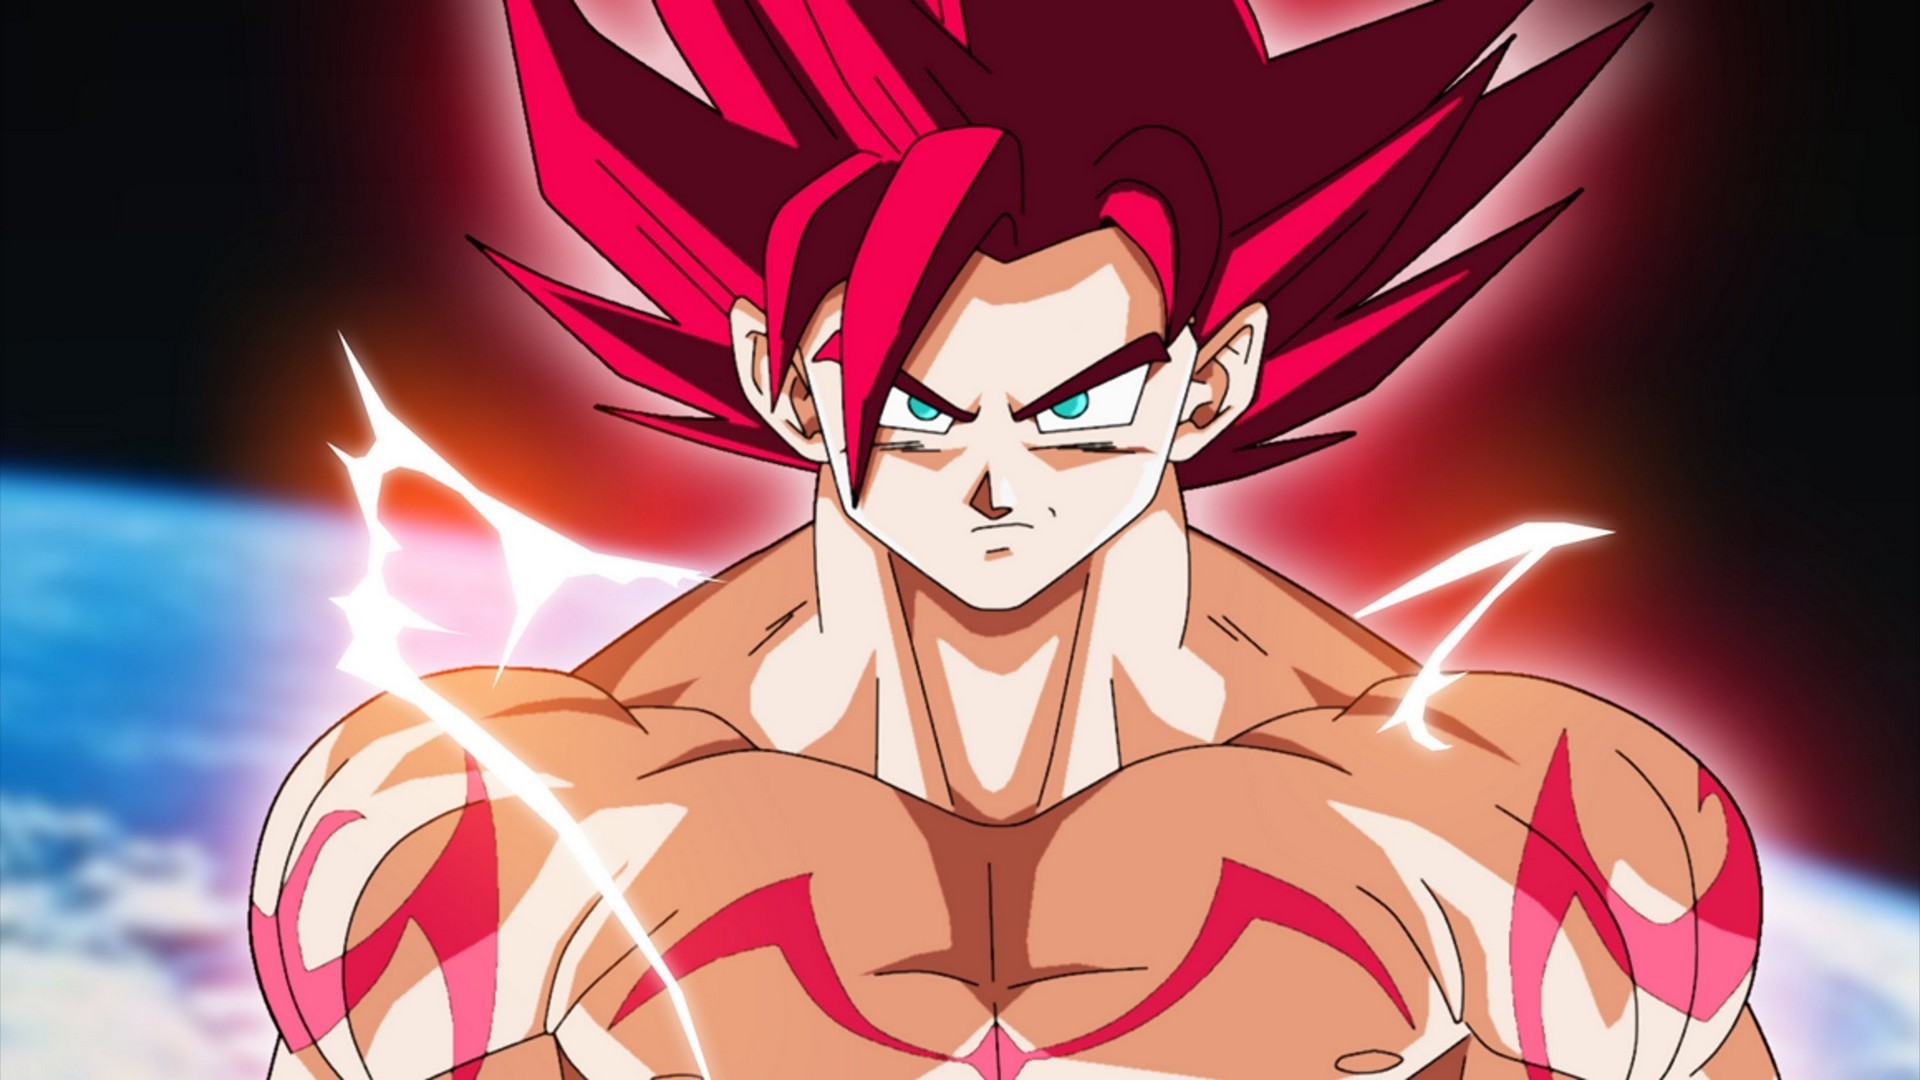 Best Goku Super Saiyan God Wallpaper with image resolution 1920x1080 pixel. You can use this wallpaper as background for your desktop Computer Screensavers, Android or iPhone smartphones